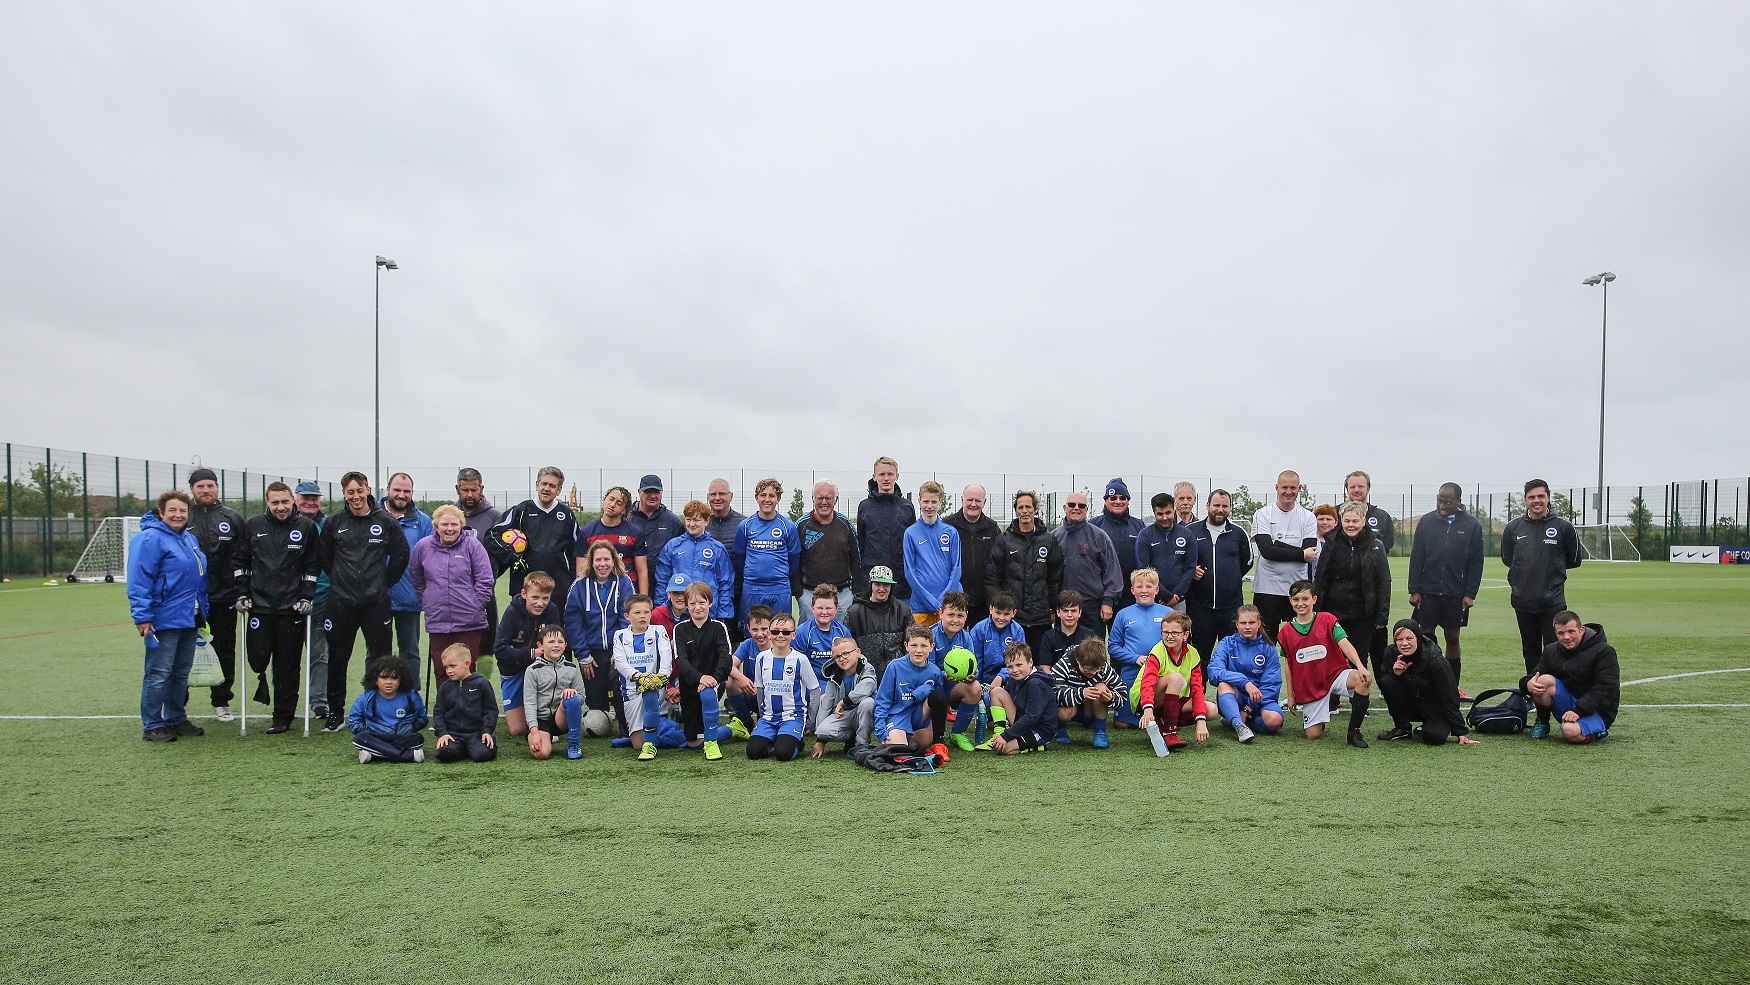 Rotary club provides welcome support for Albion in the Community